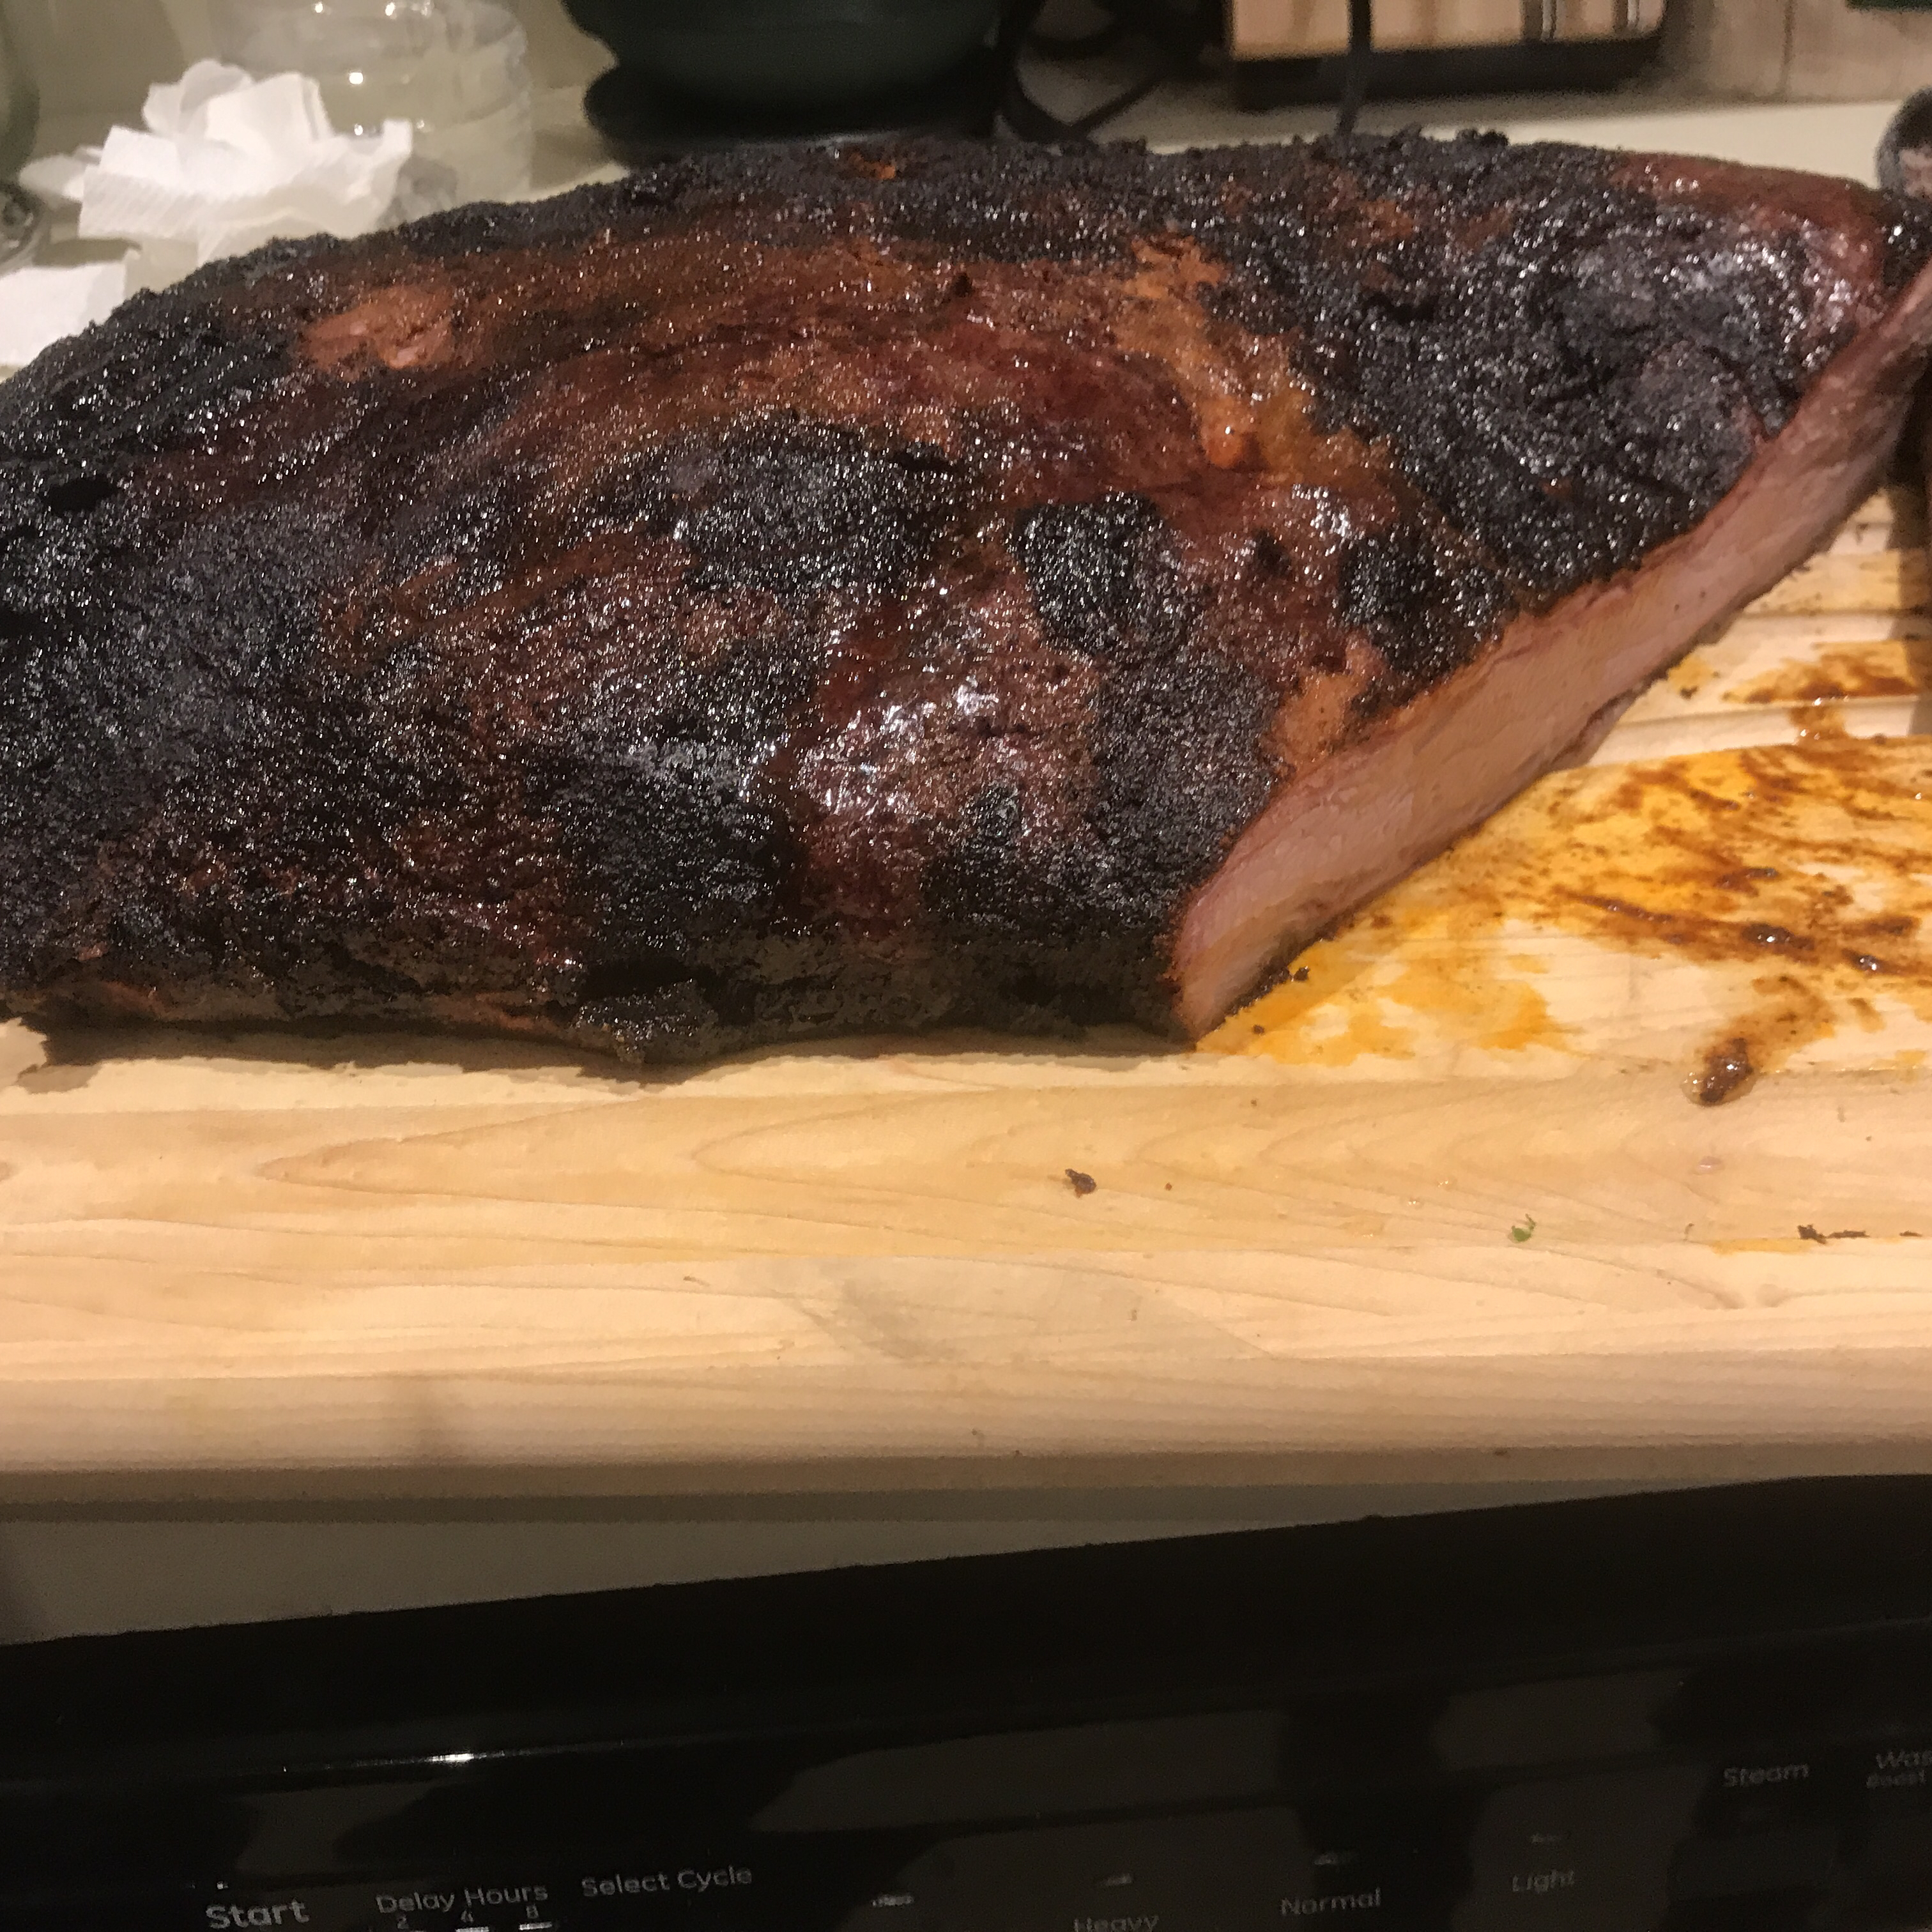 Yeah, I-Lived-in-Texas, Smoked Brisket 